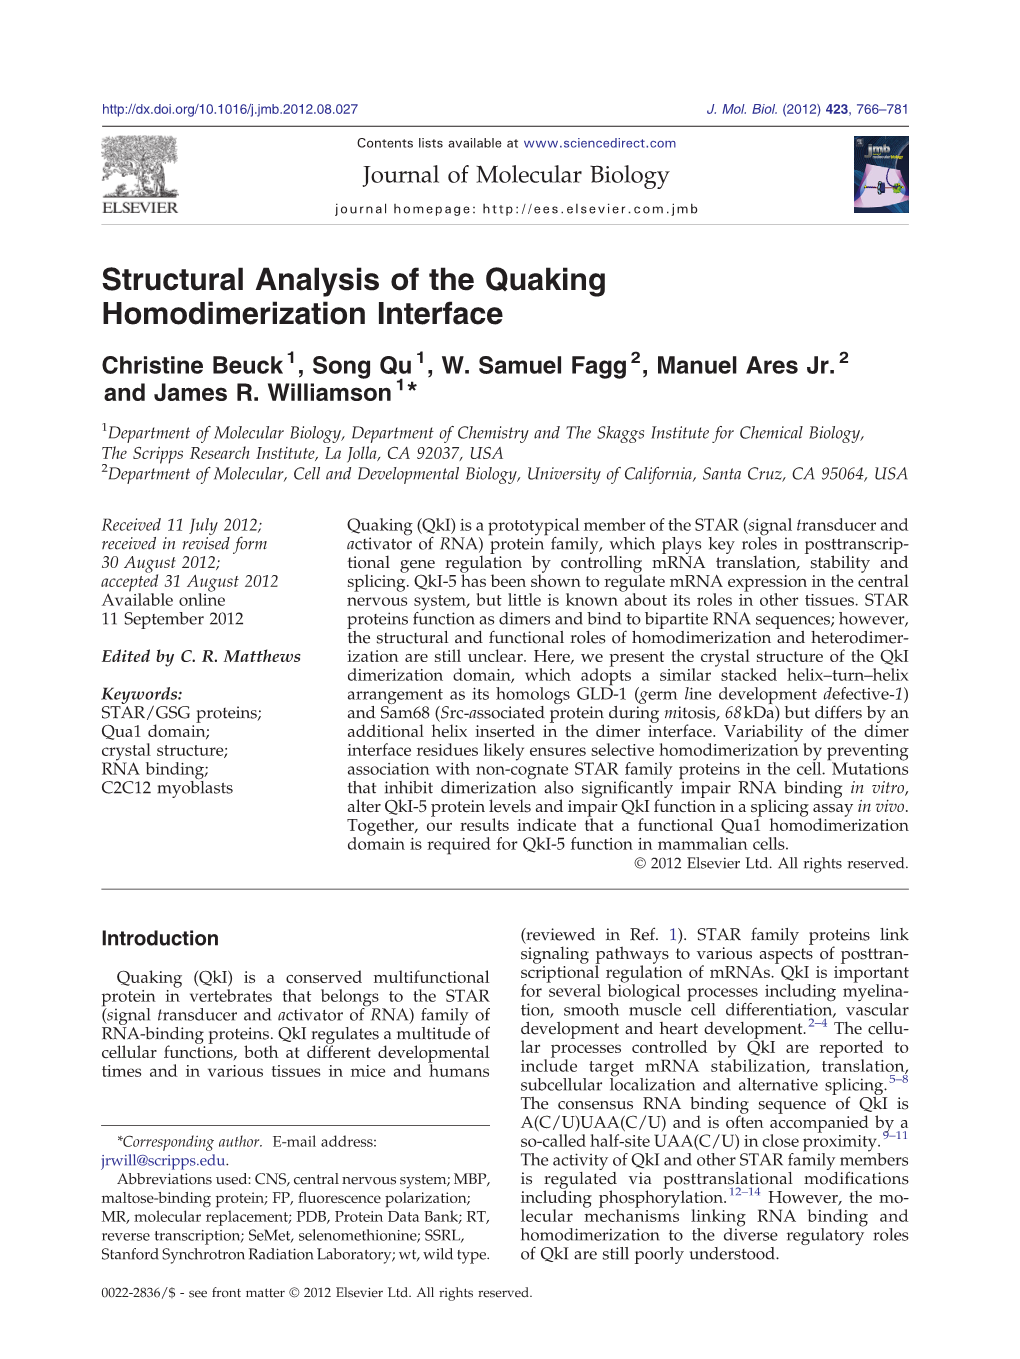 Structural Analysis of the Quaking Homodimerization Interface